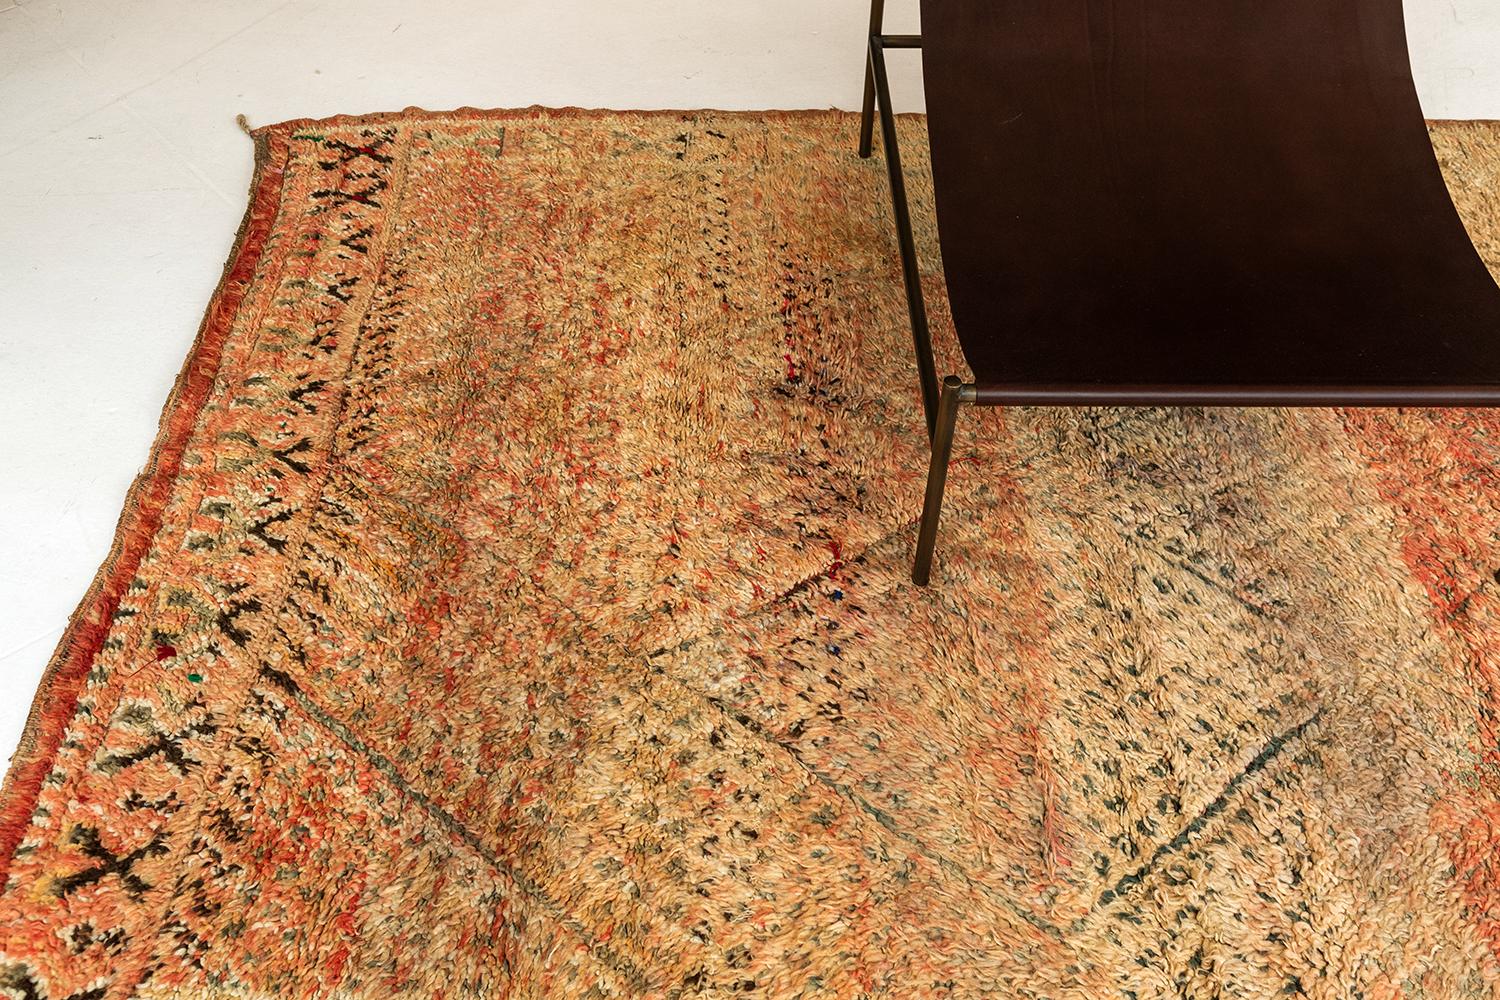 A magnificent Vintage Moroccan Azilal Tribe rug that boasts its warm colour scheme of amber orange. It features an allover lattice of gray lines forming lozenge trellis intricately running along the plush textured field. With its appealing impact